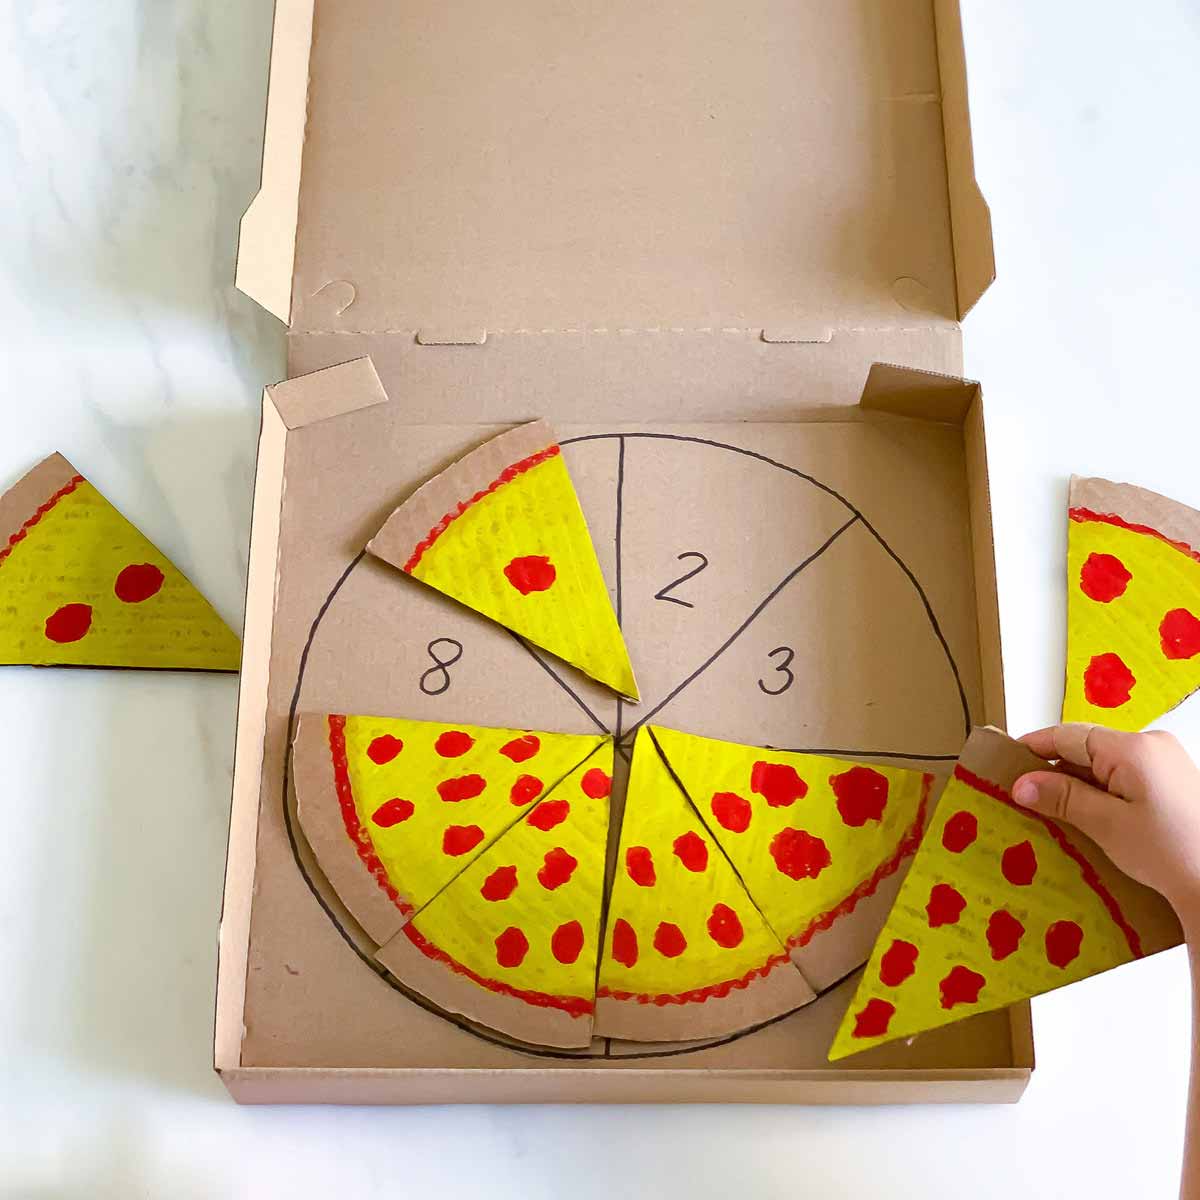 Number Recognition Game for the Pizza Lover